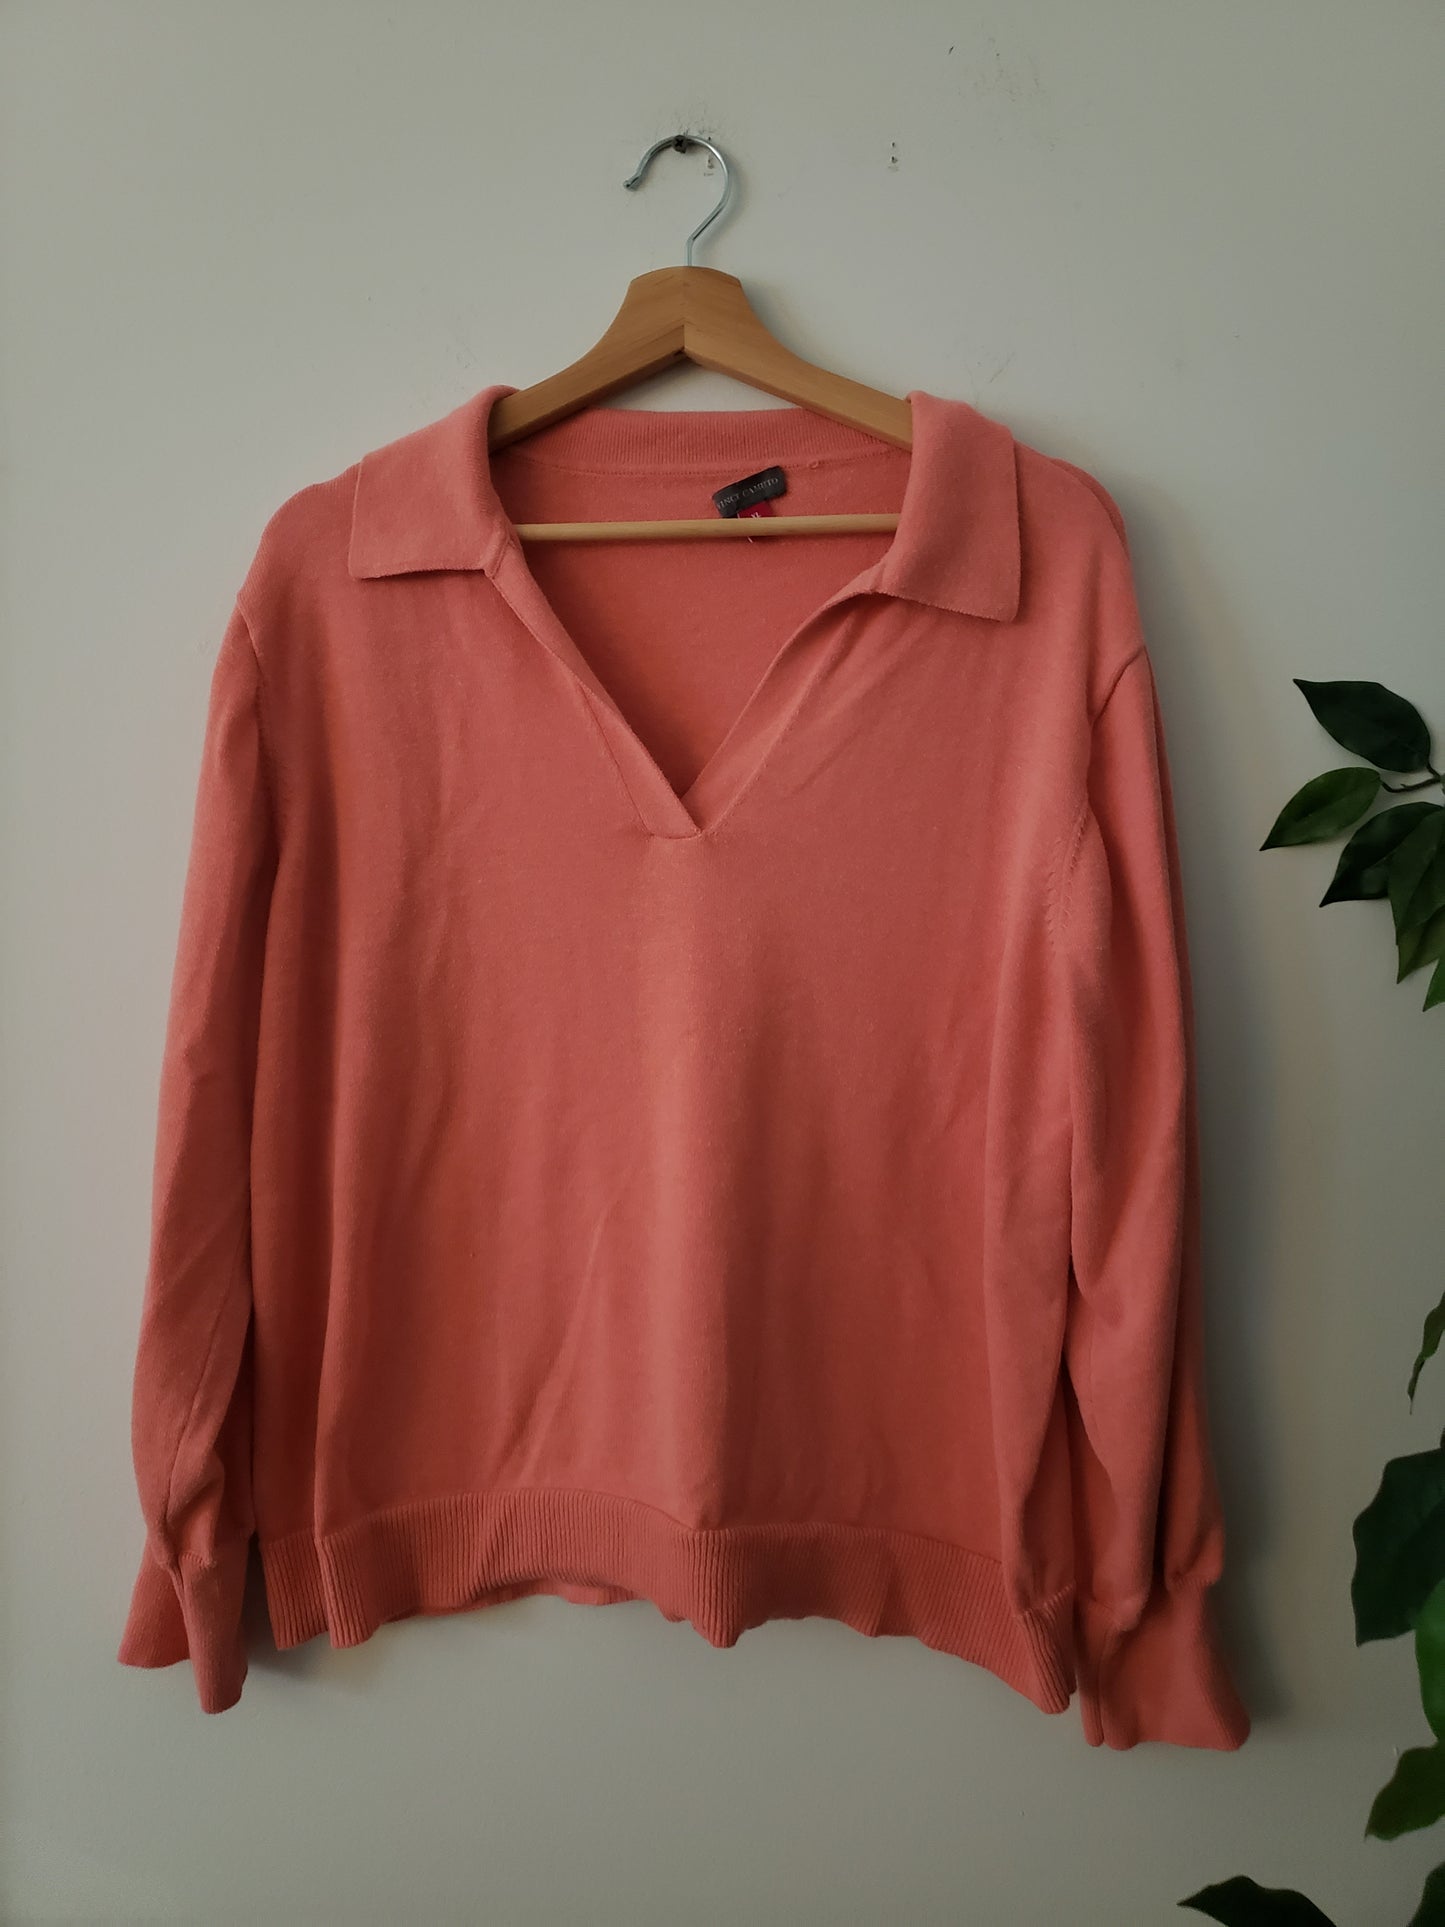 VINCE CAMUTO PEACH SWEATER SIZE XL